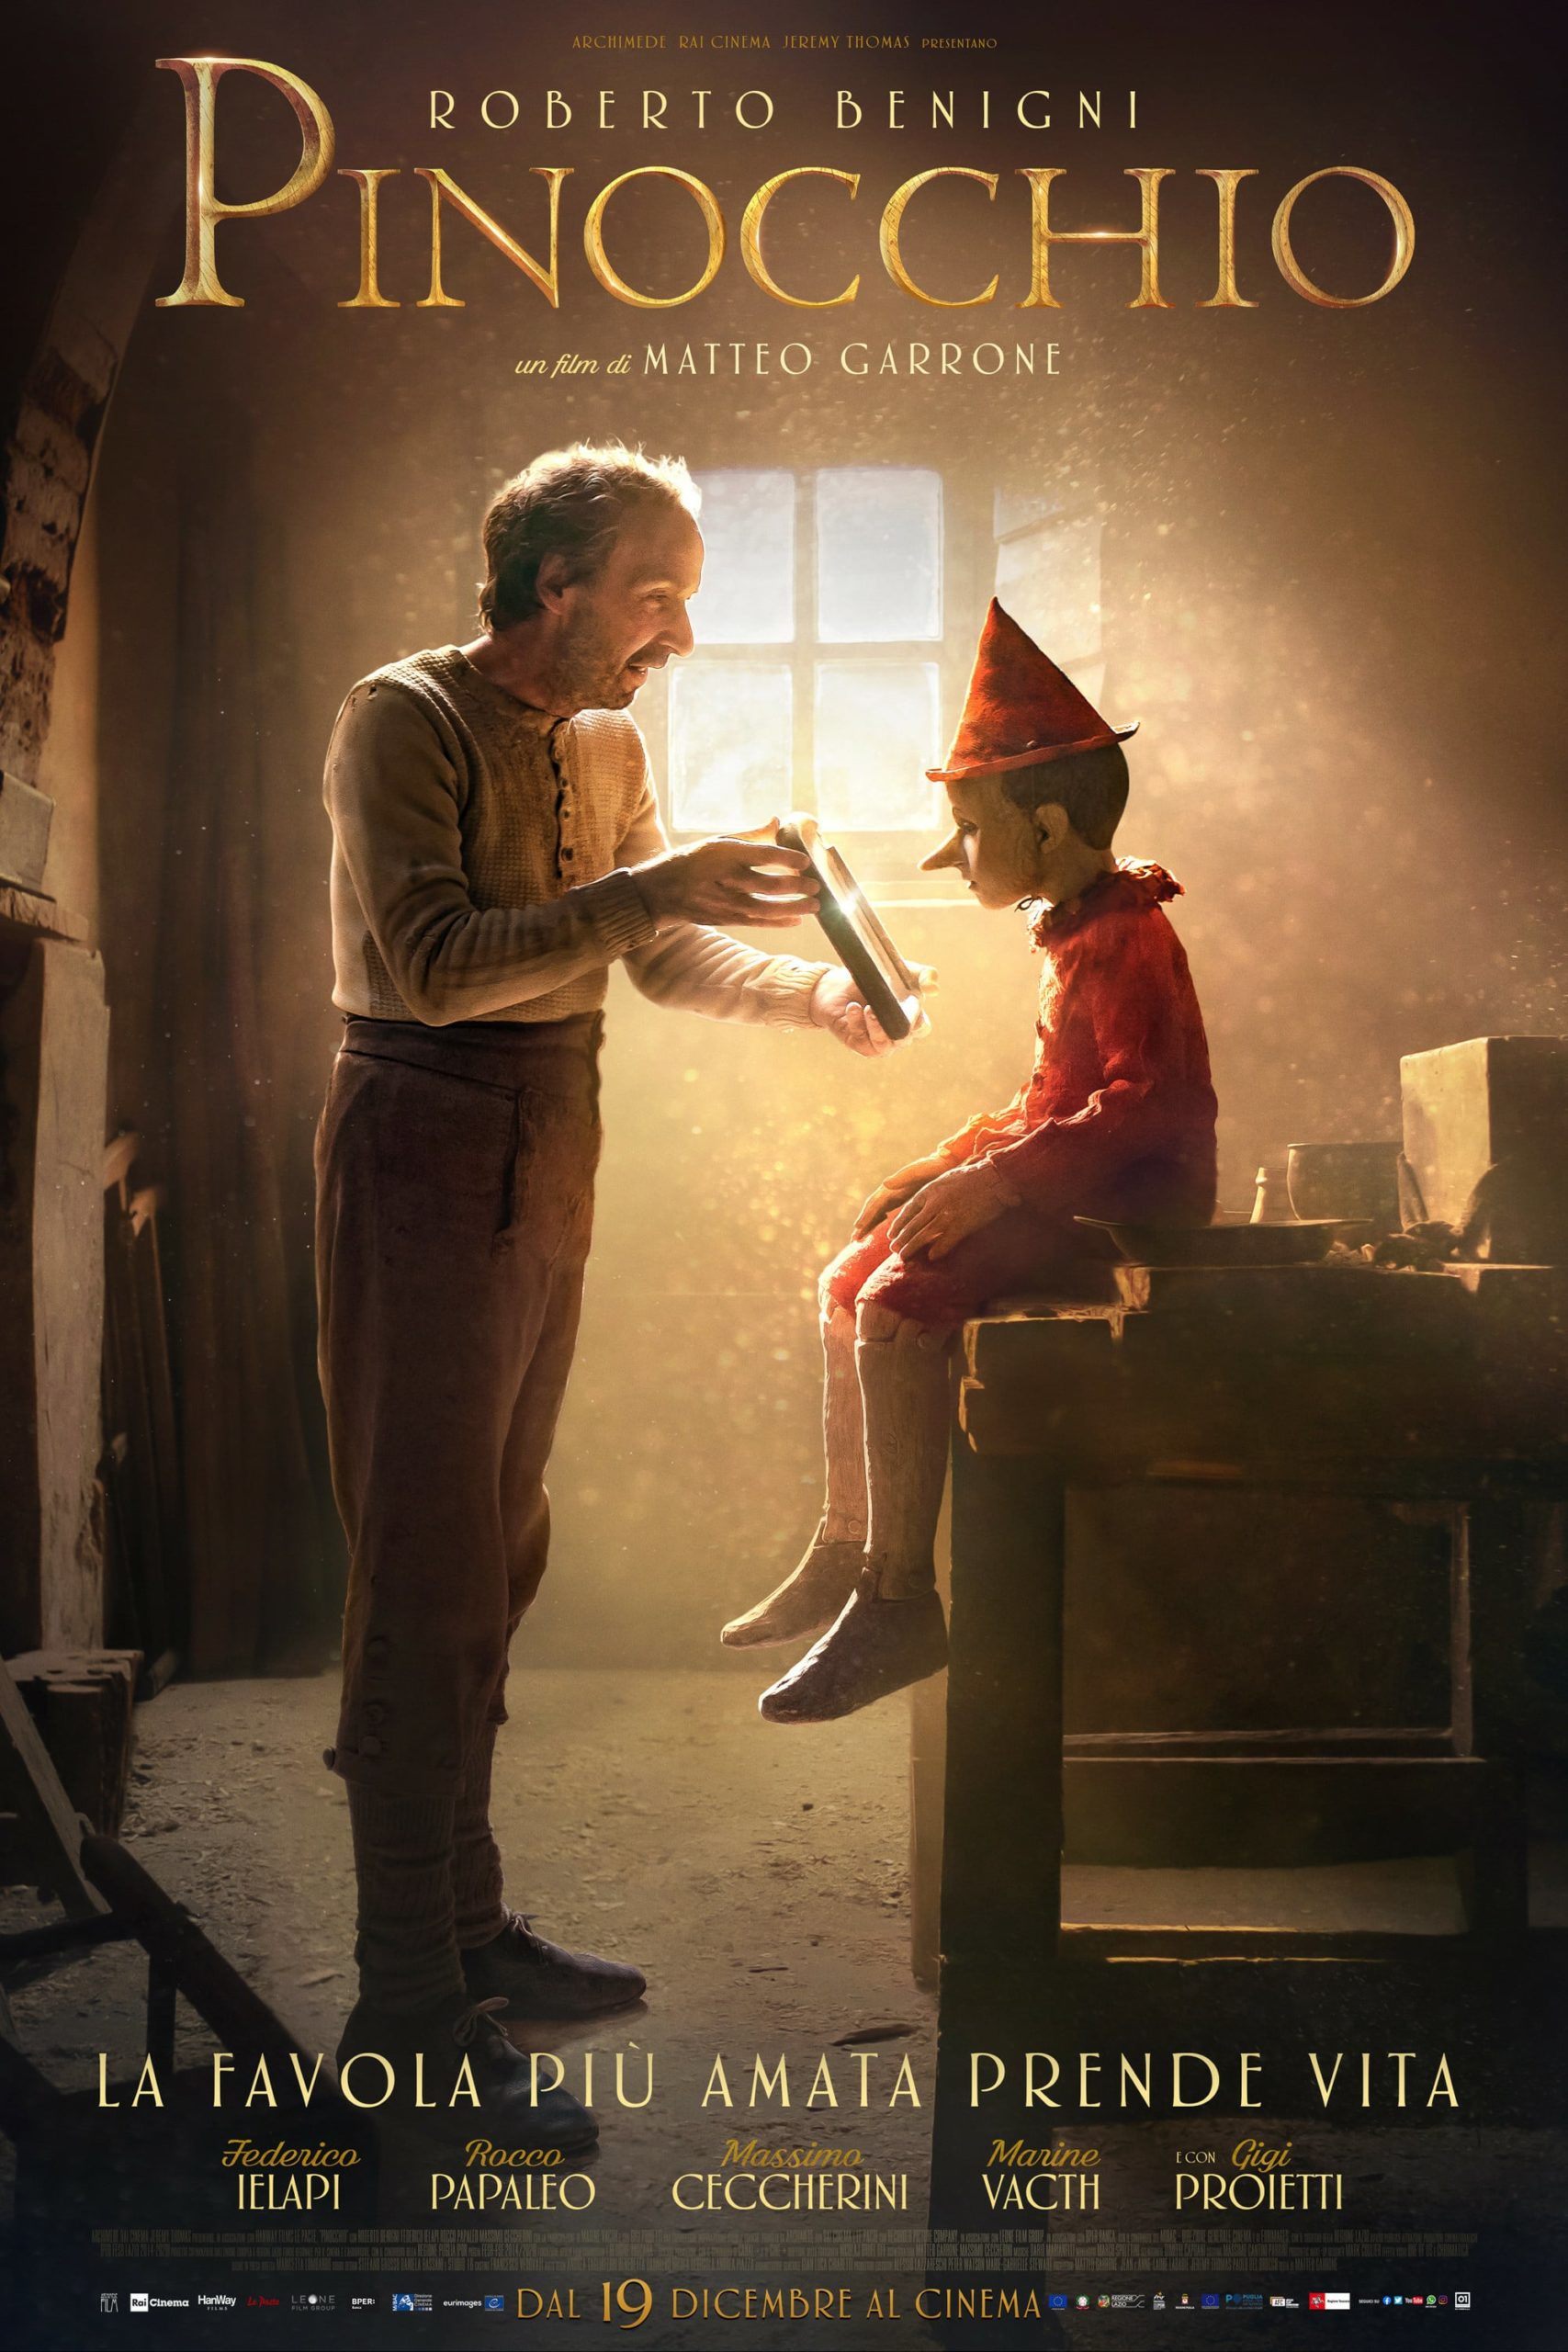 Poster for the movie "Pinocchio"